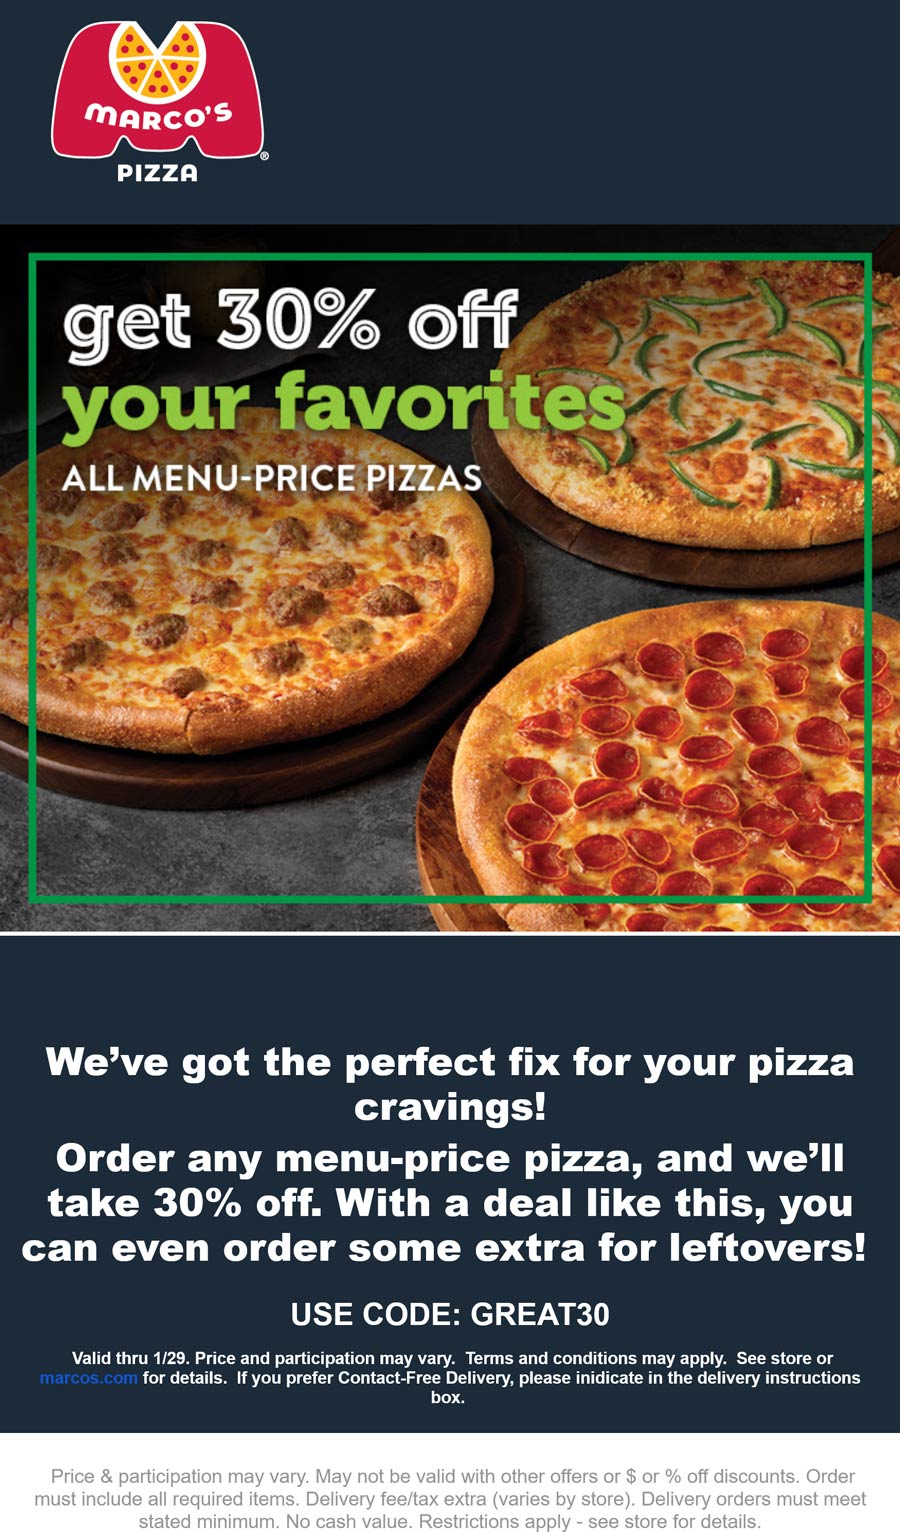 Marcos restaurants Coupon  30% off at Marcos Pizza via promo code GREAT30 #marcos 